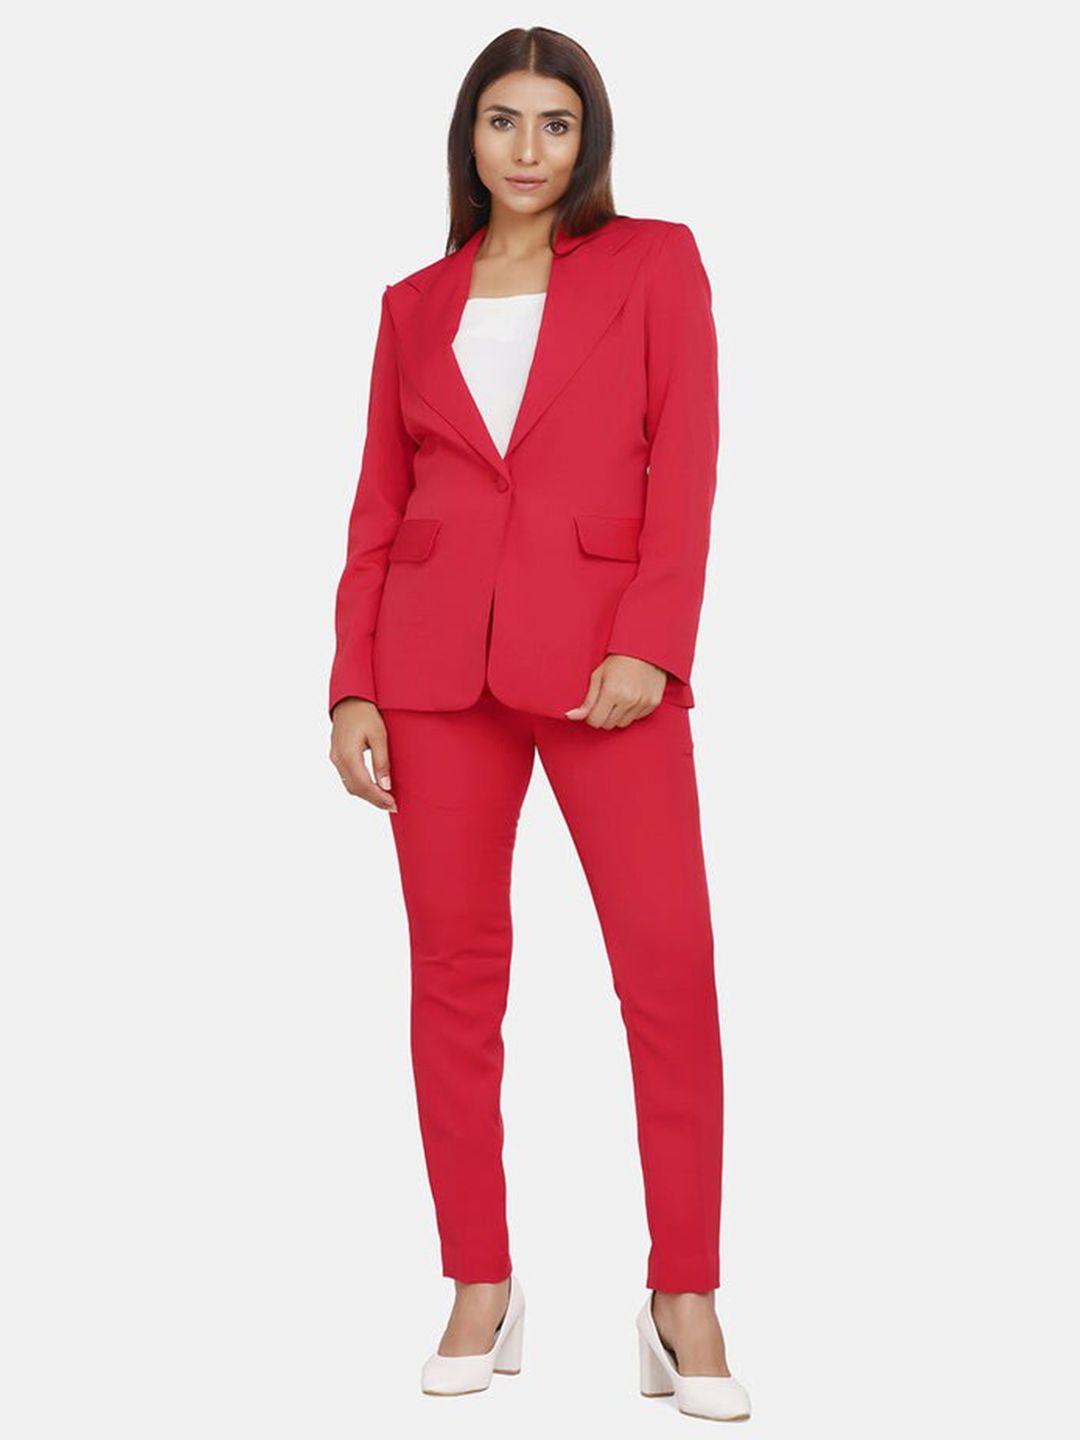 powersutra women red solid blazer with trousers